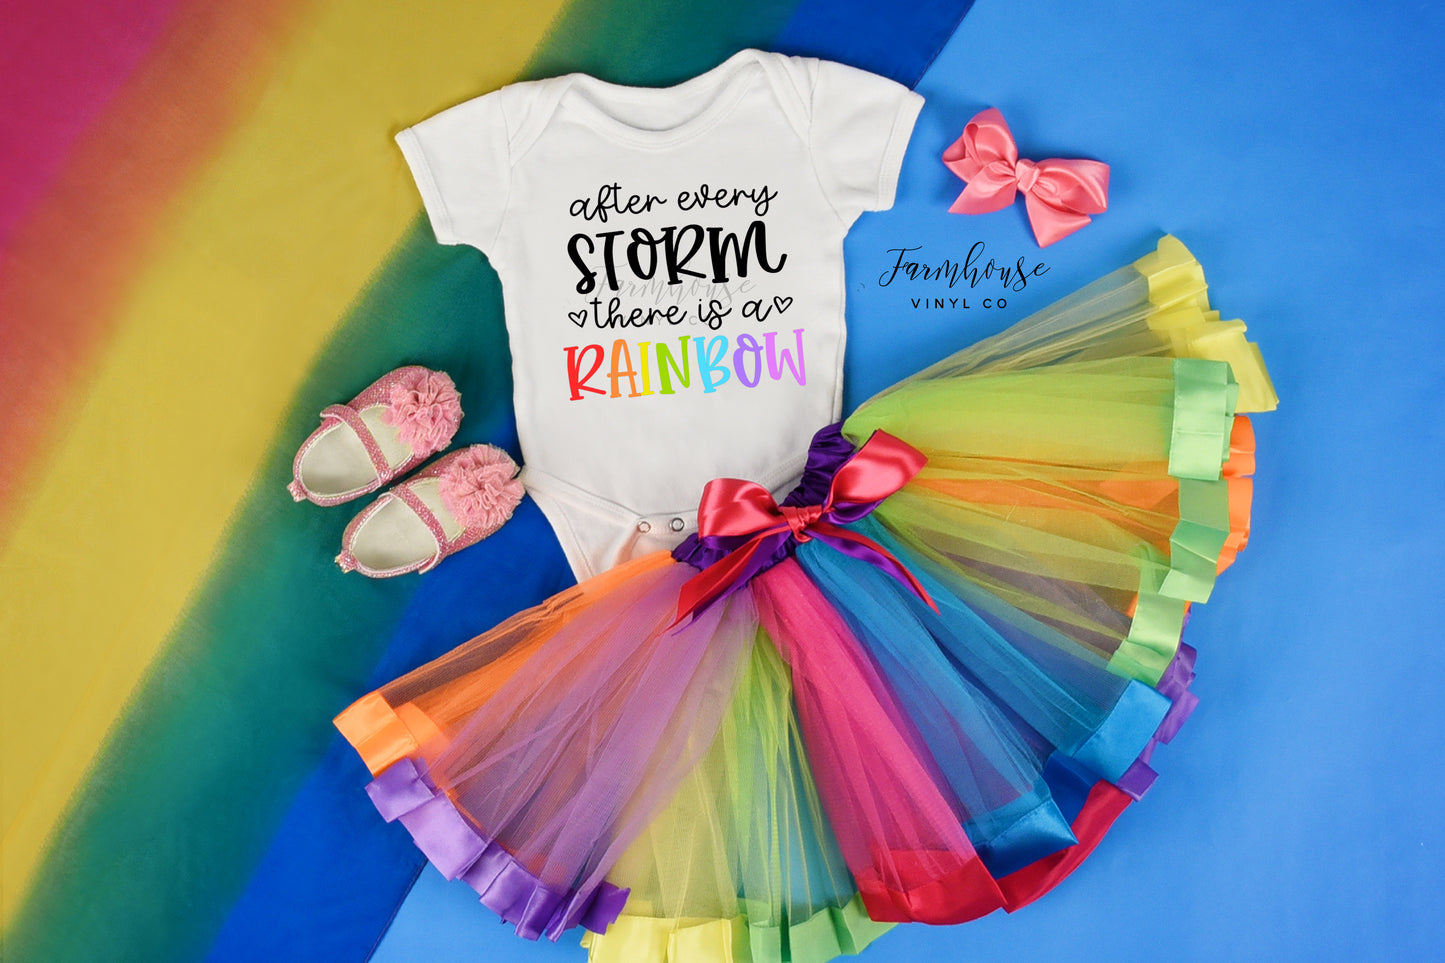 After Every Storm There is A Rainbow Onesie - Farmhouse Vinyl Co